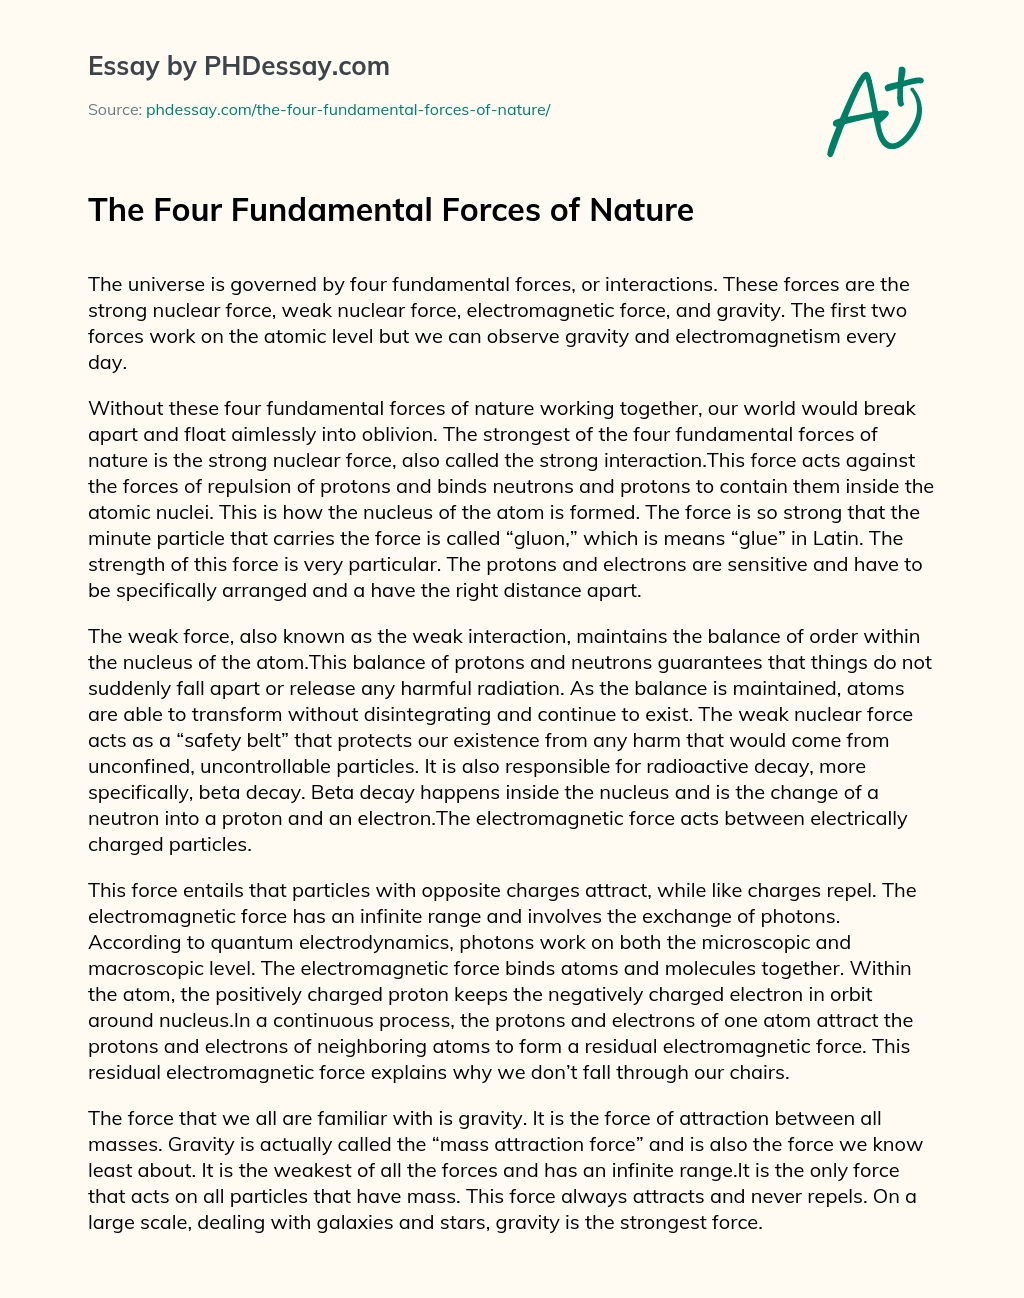 The Four Fundamental Forces of Nature essay